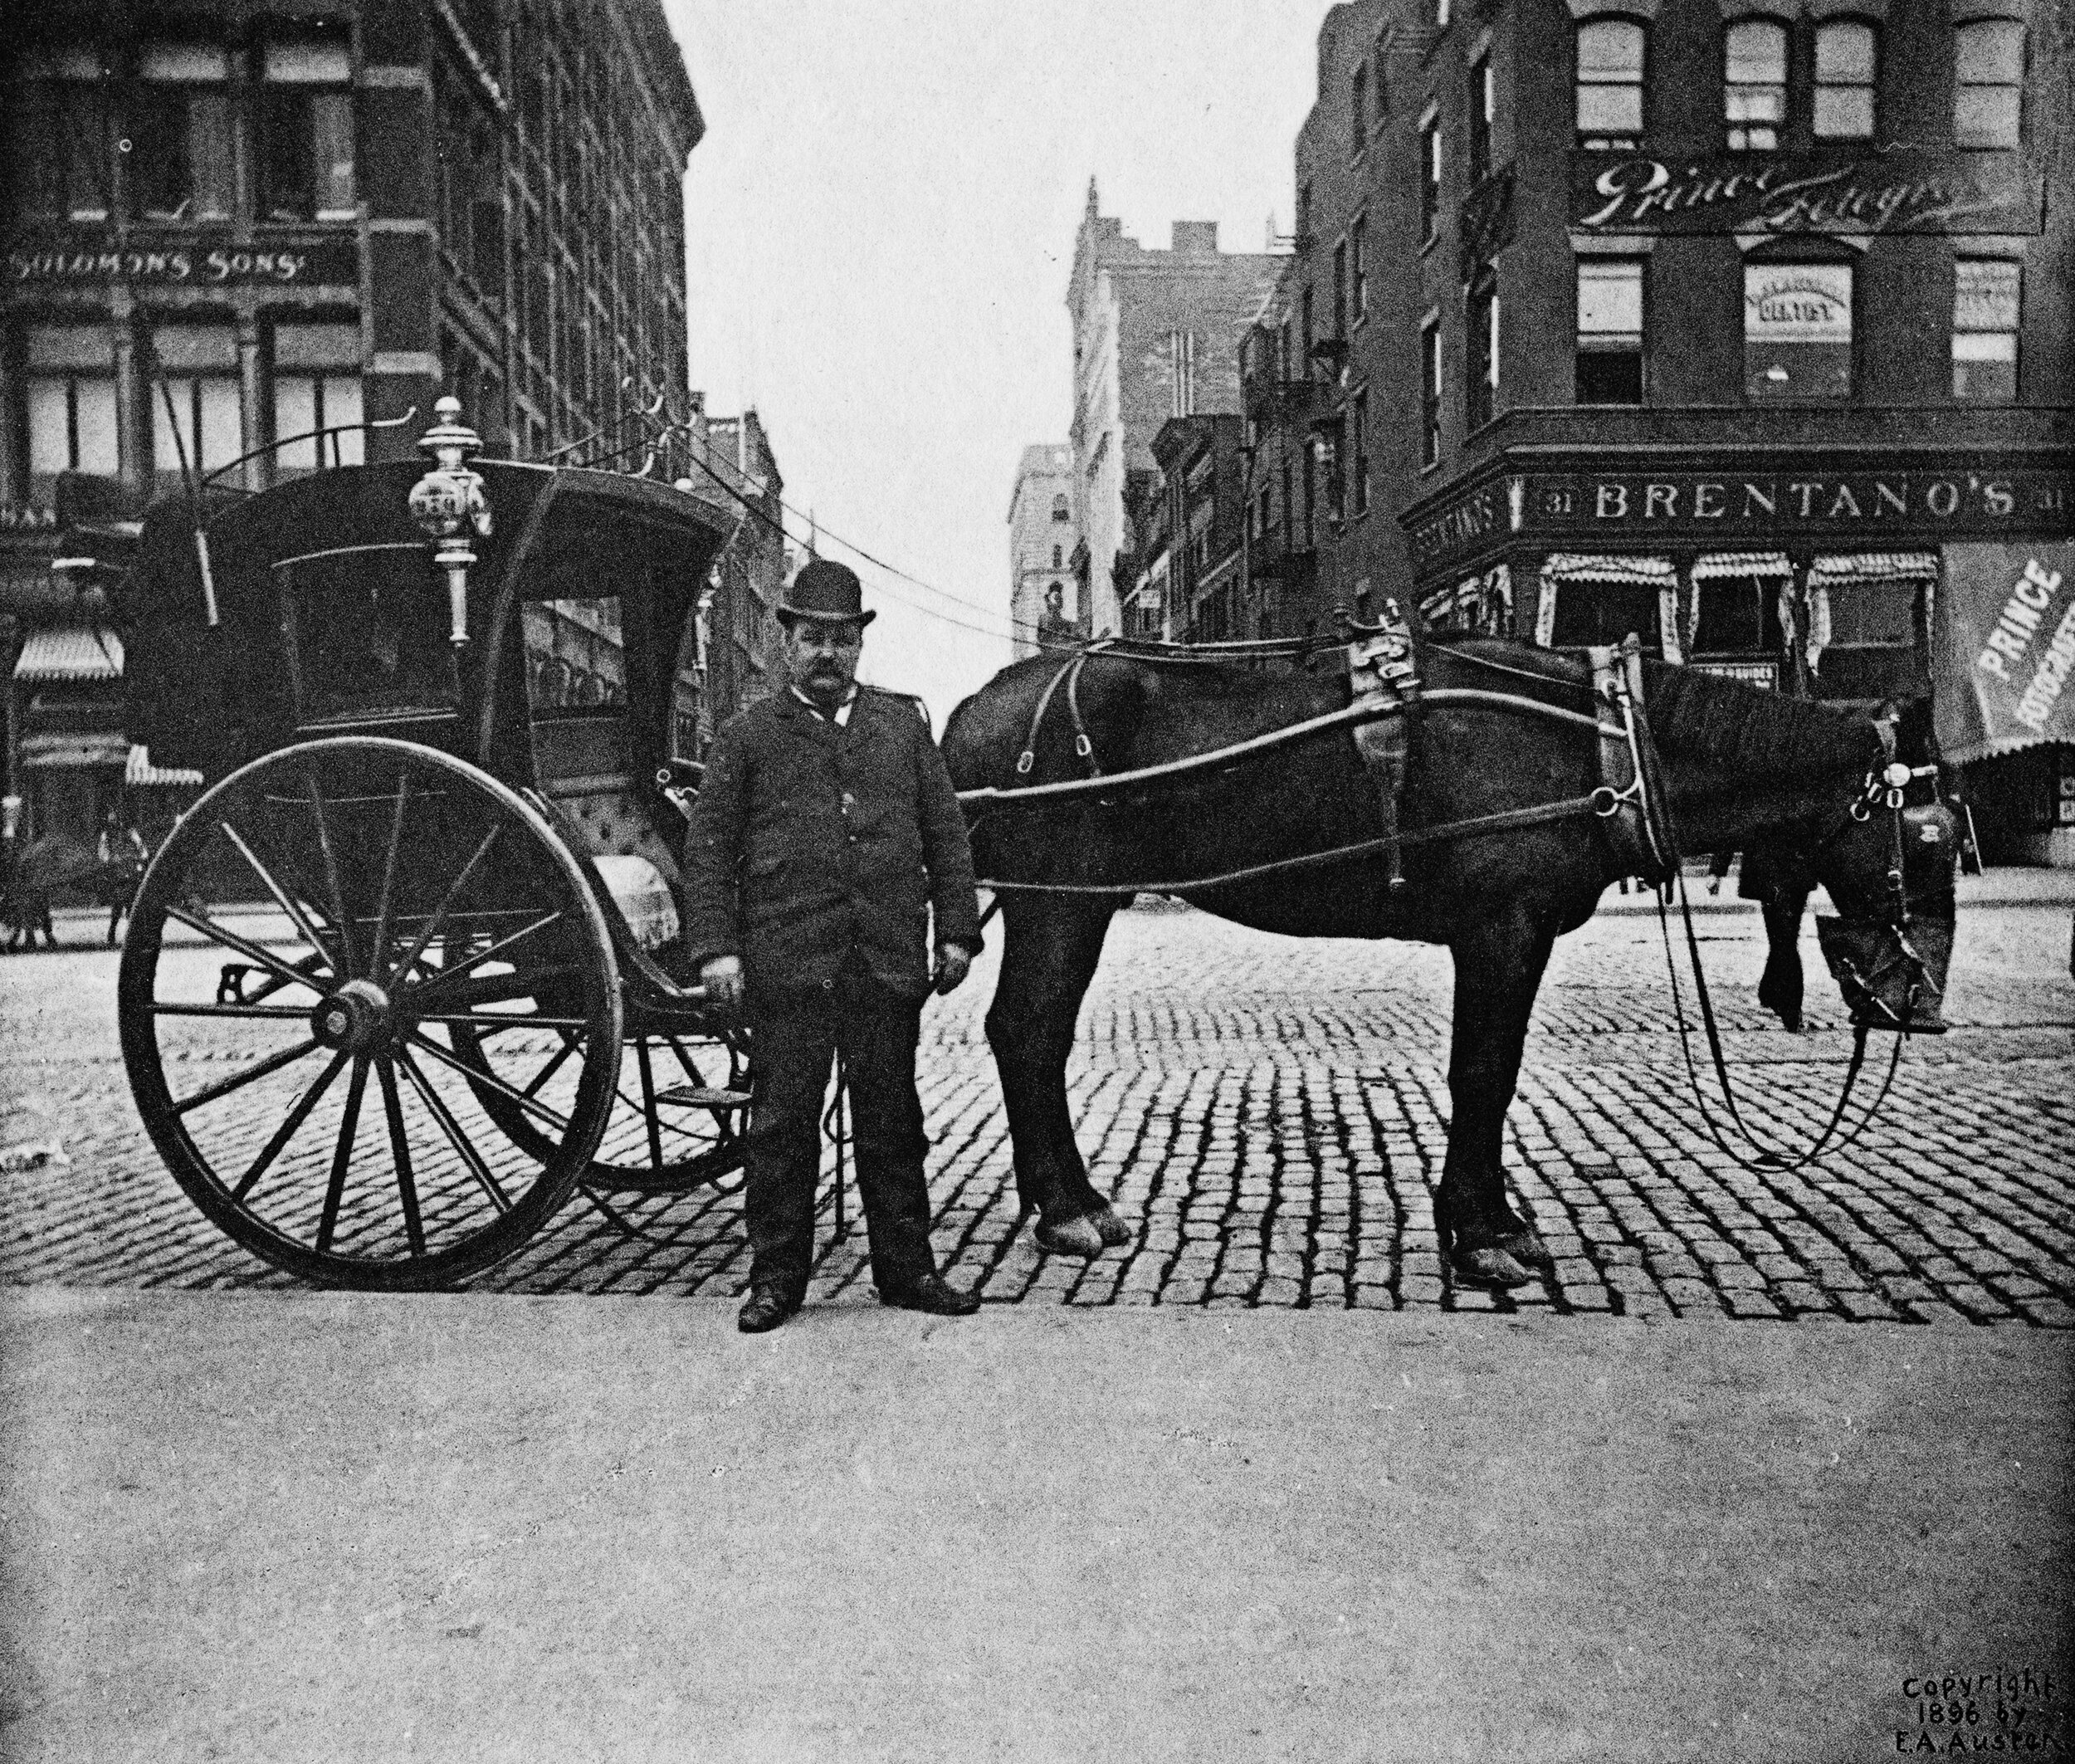   Hansom Cab, Union Square  Collection of Historic Richmond Town, 50.015.2146 